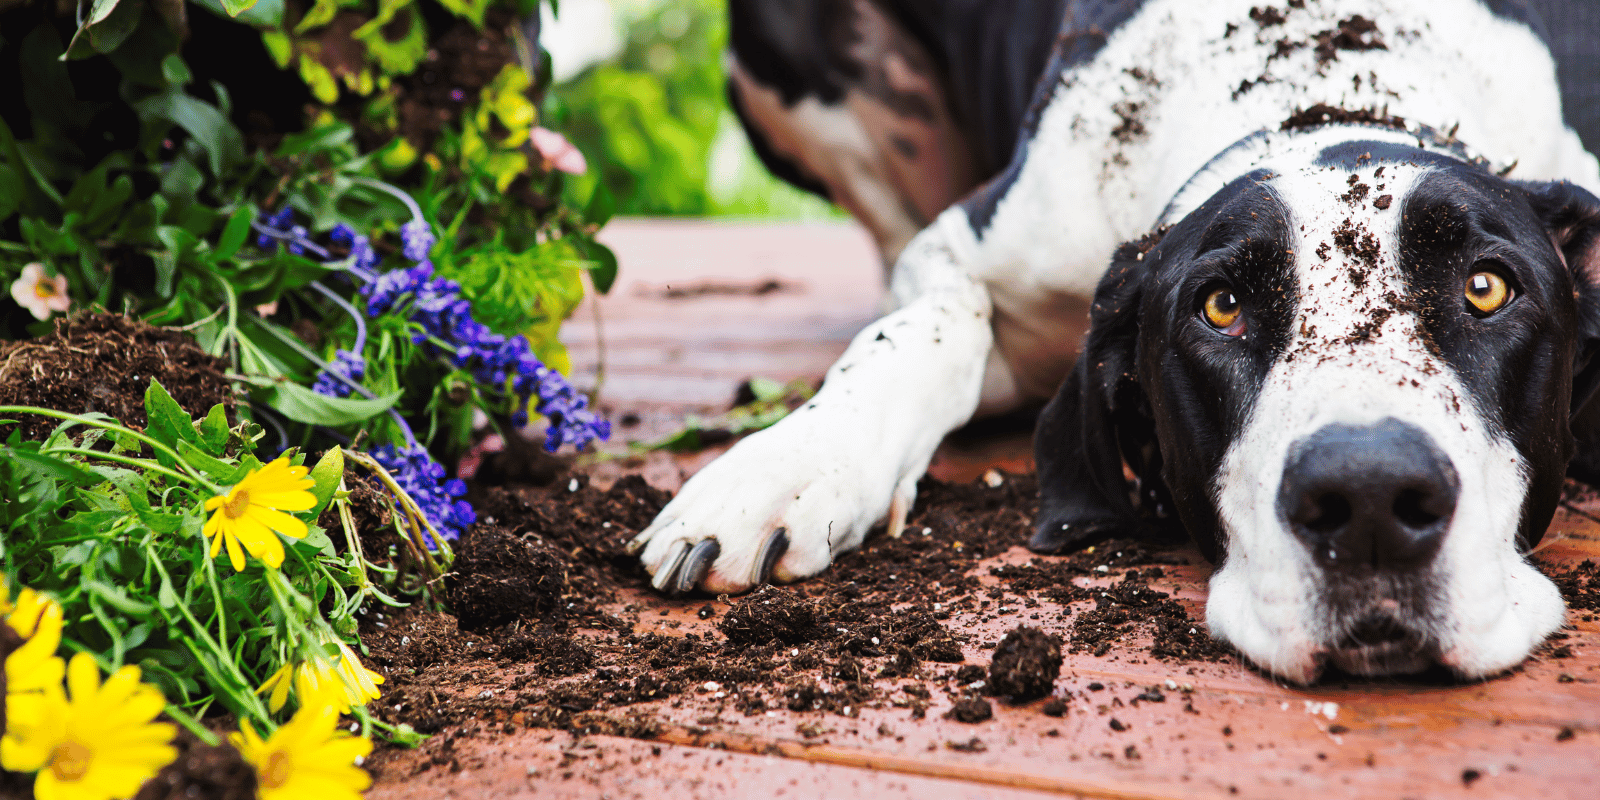 Black and white dog laying down next to outdoor garden plants that have been dug up. Innocently with dirt on his face and paws.